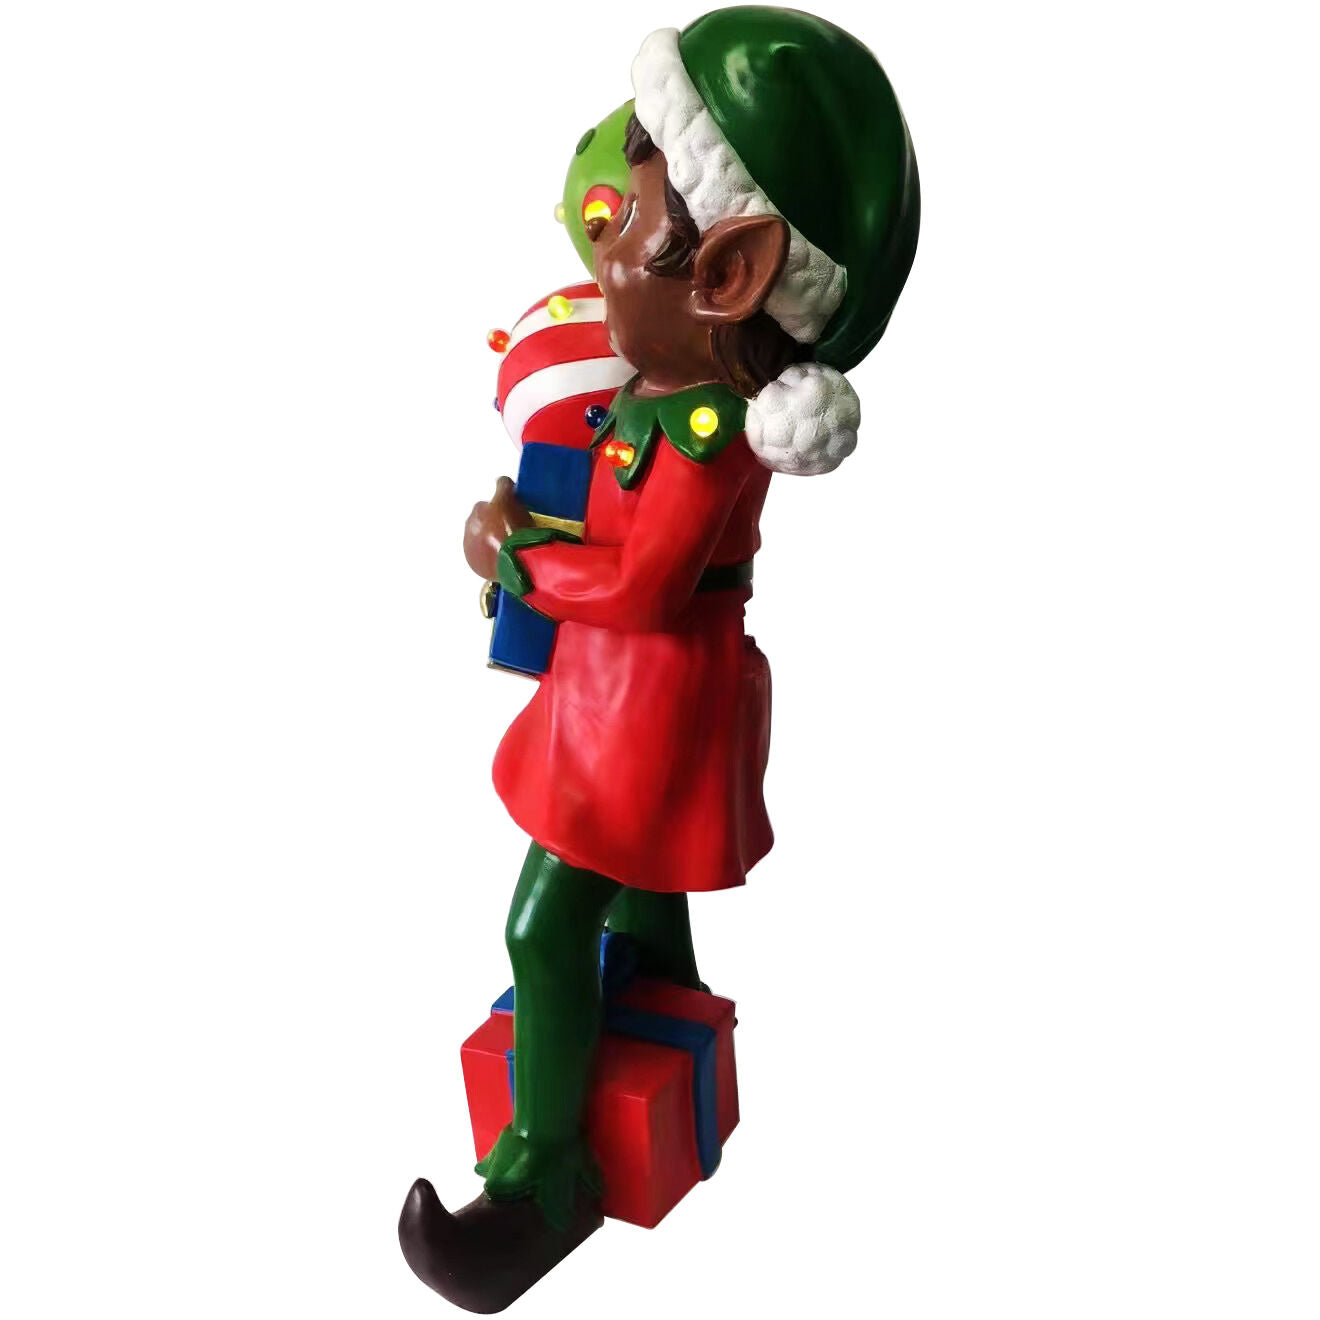 Fraser Hill Farm - 30-inch African American Elf Figurine Holding Presents with Built-in Multicolor LED Lights